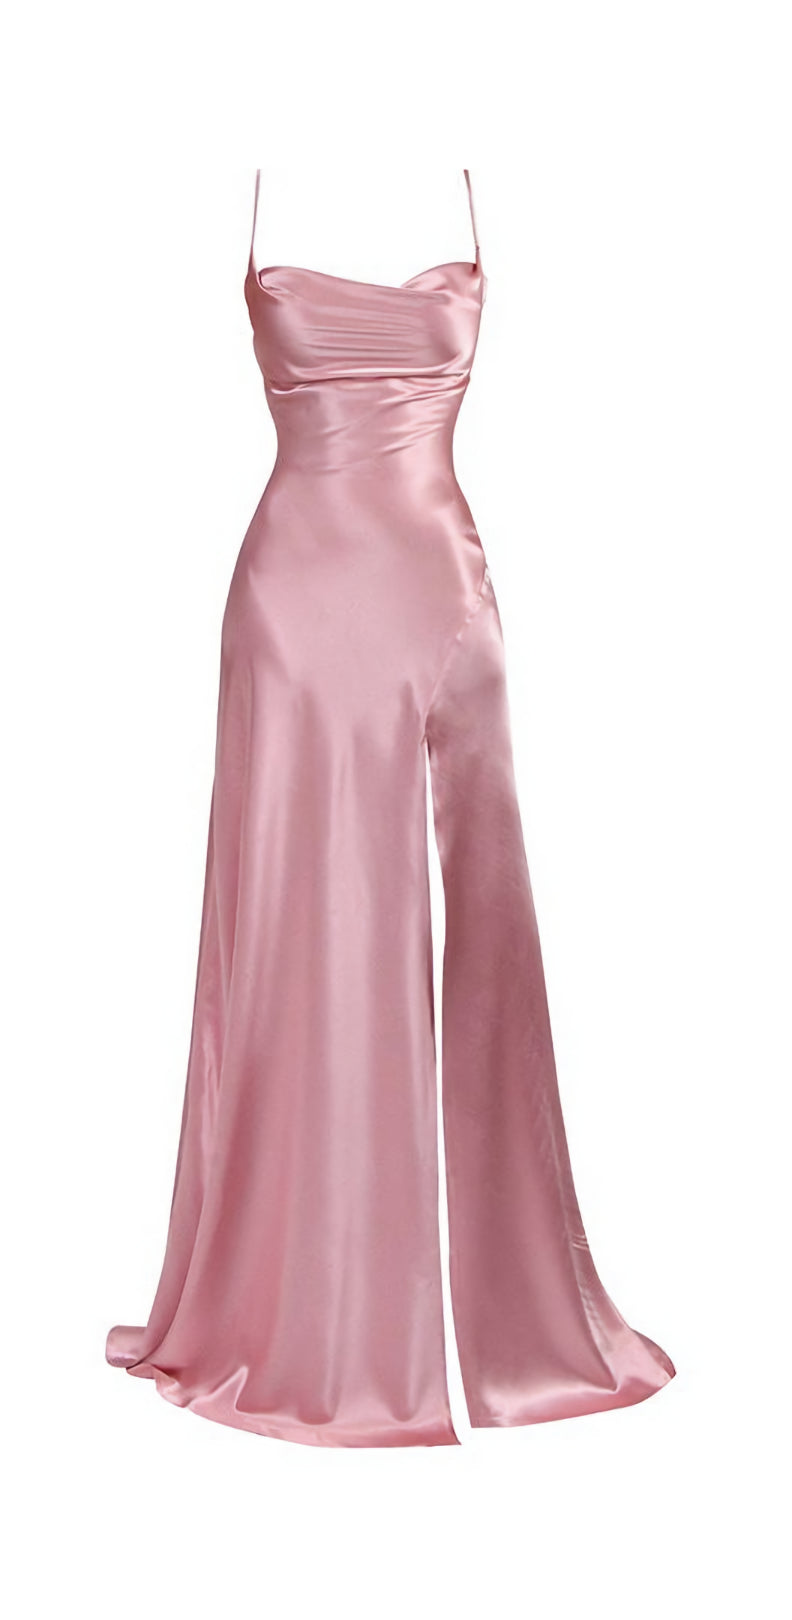 Party Dresses For Girl, Simple Pink Spaghetti Straps Long Prom Dress with Split